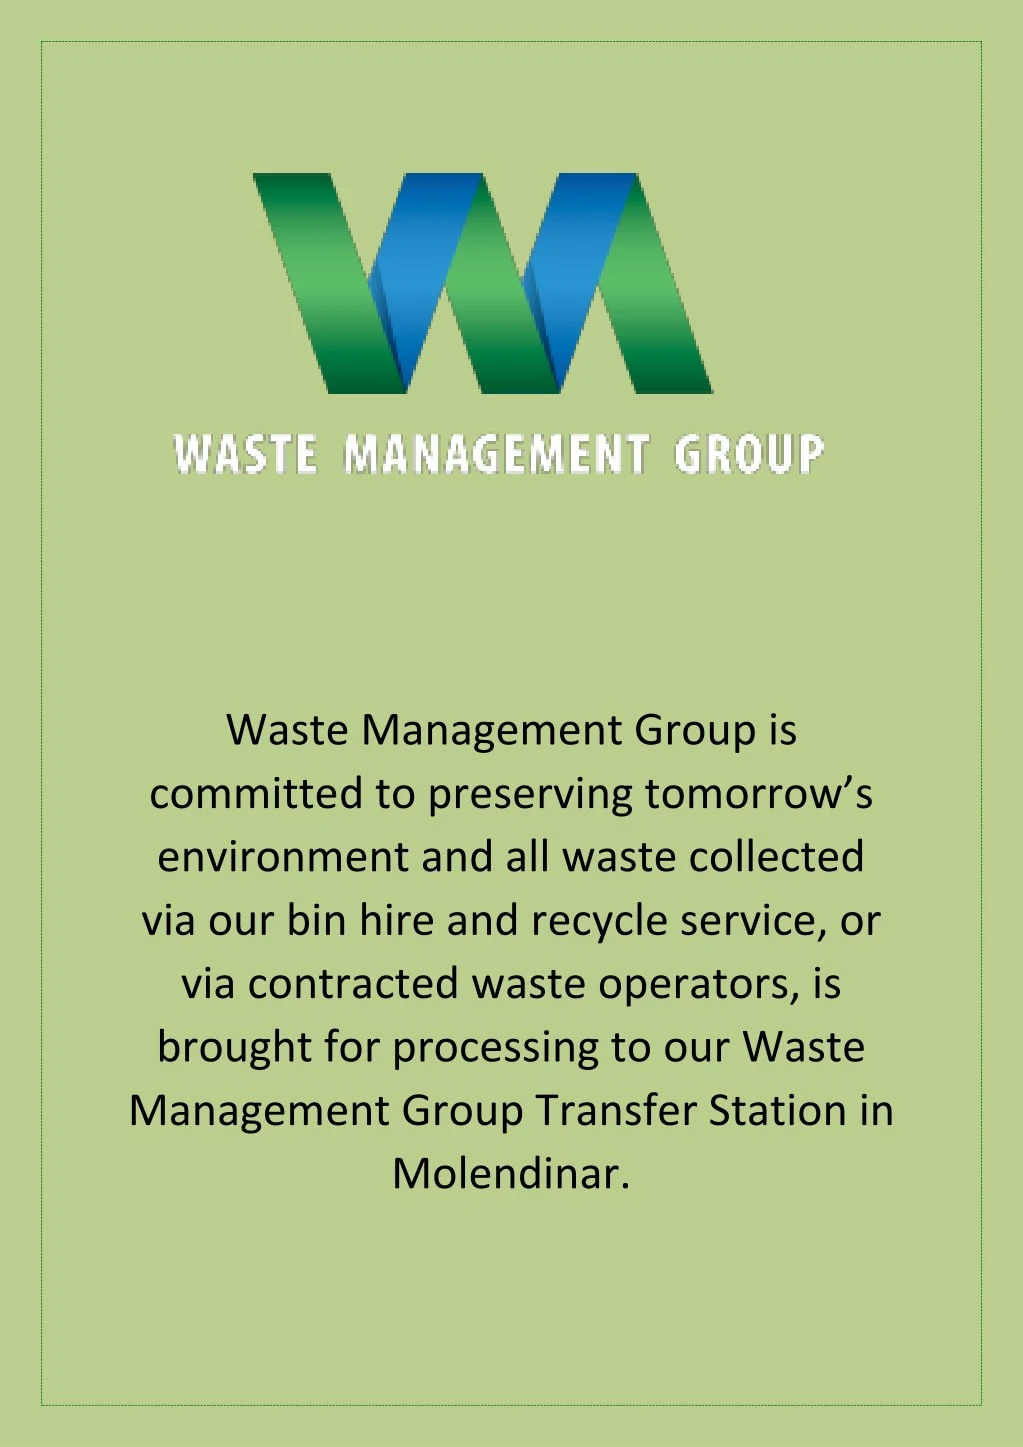 waste management group is committed to preserving